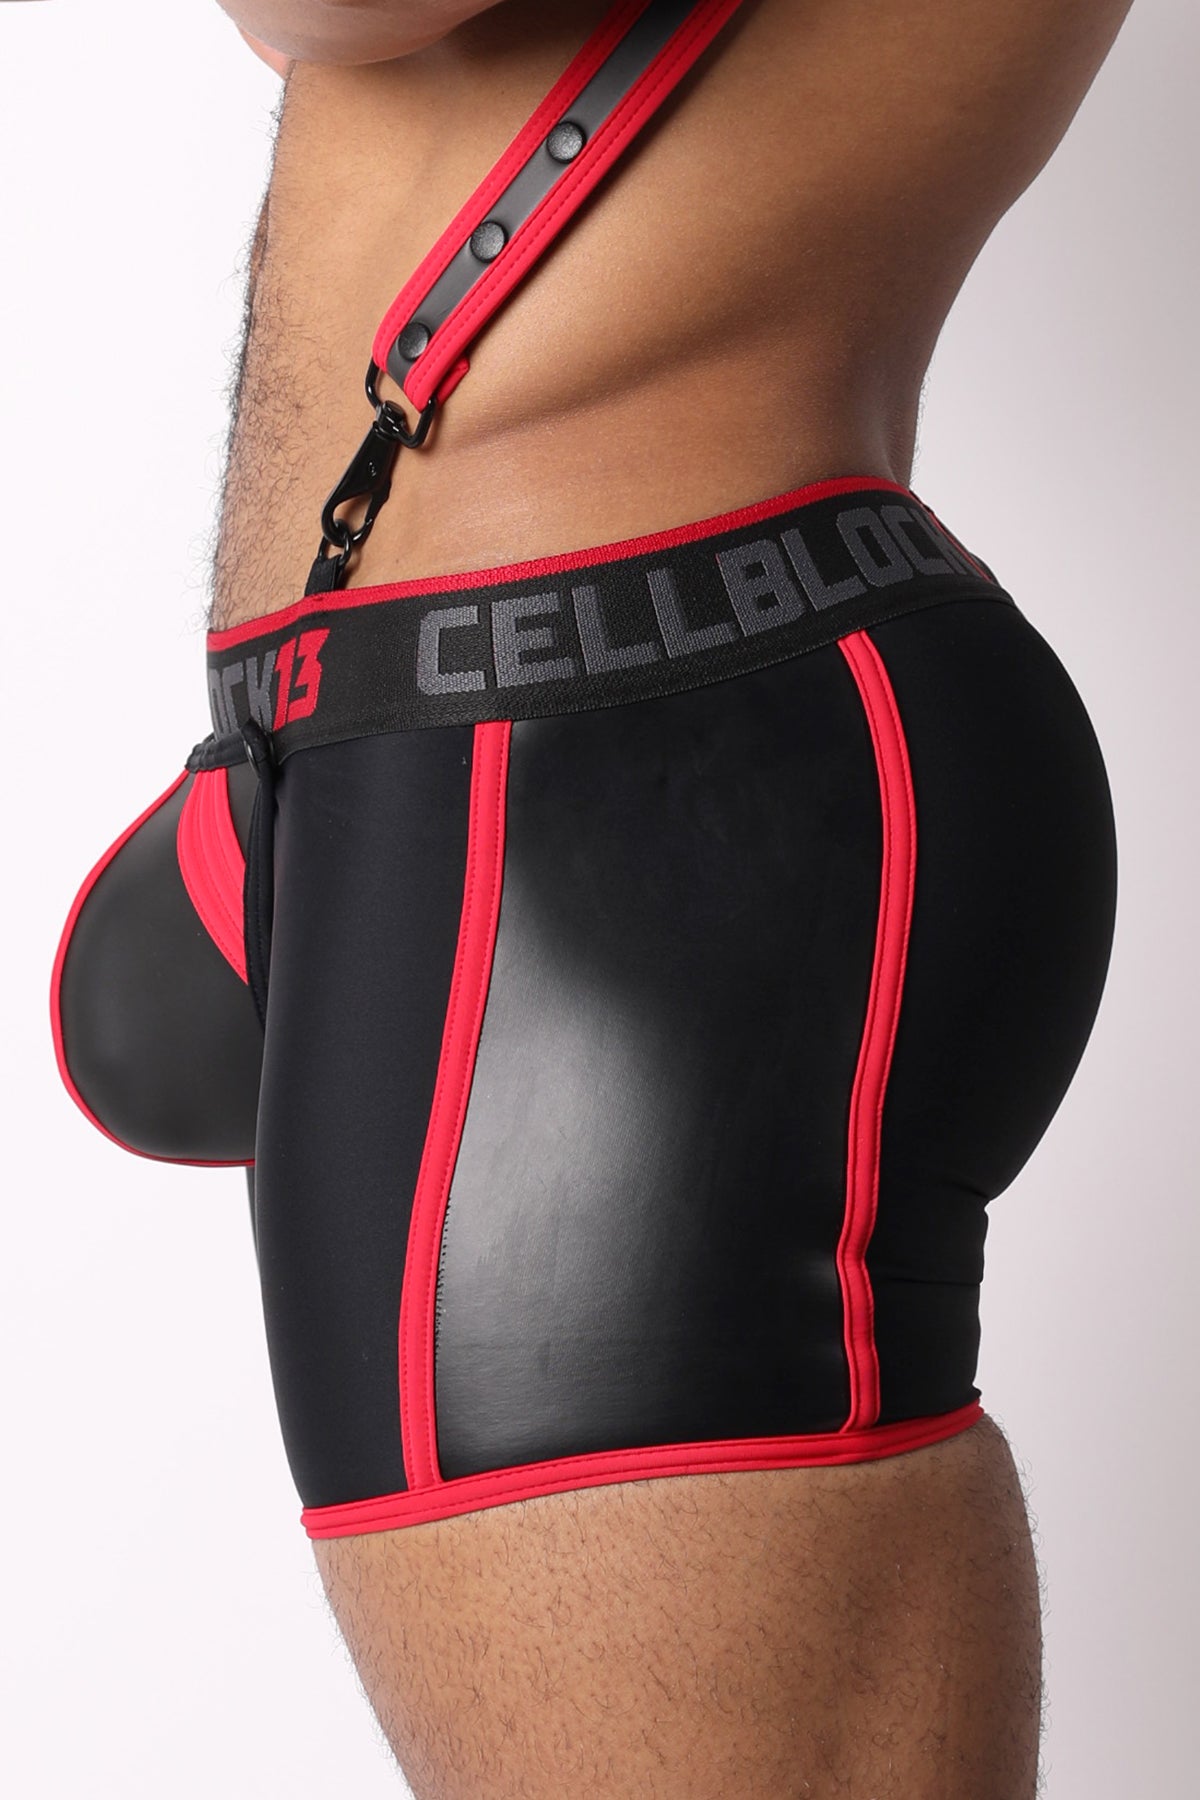 SpeedyPoppers: Cellblock 13 Stallion Zipper Trunk with Cock Ring Black